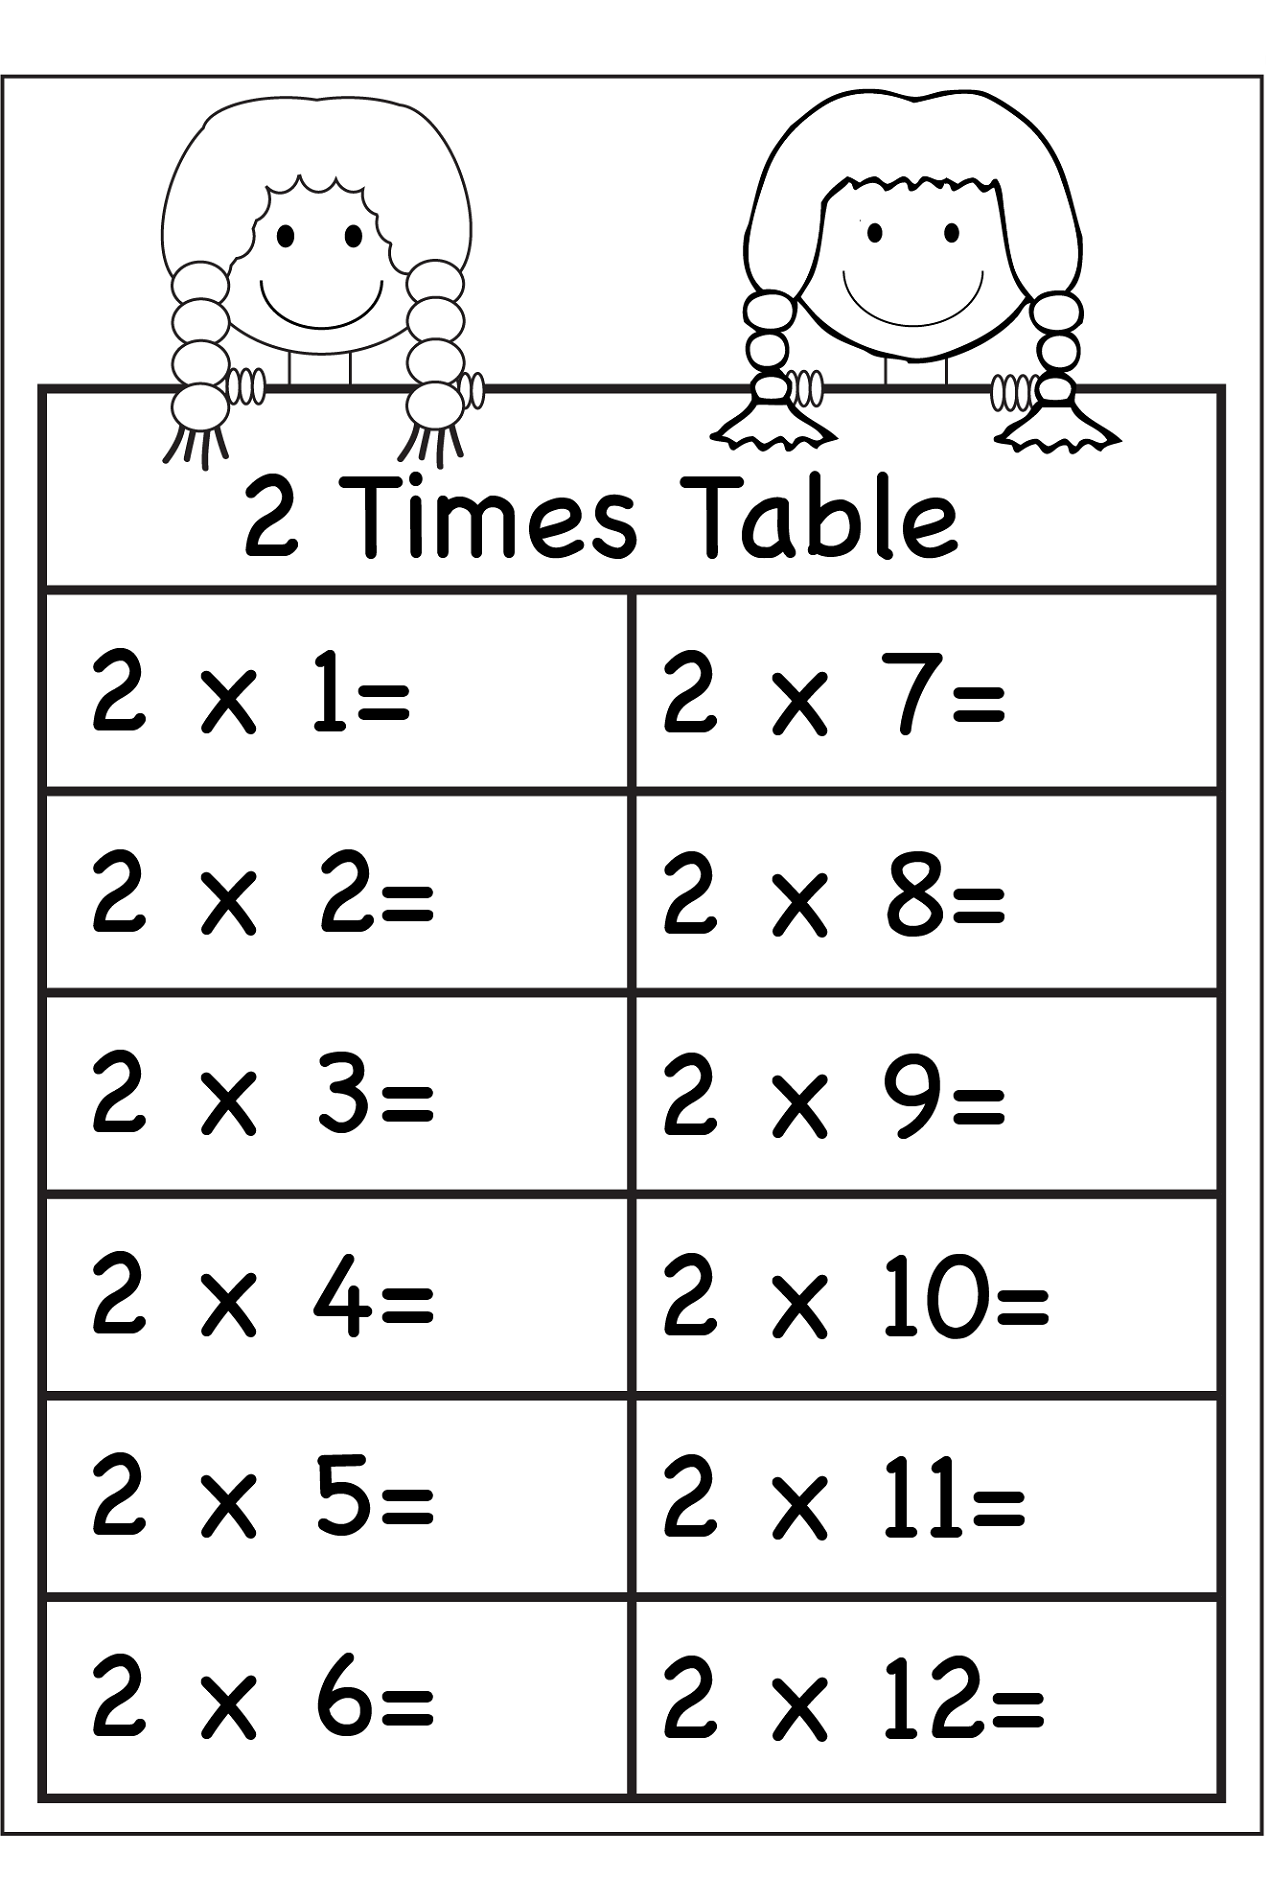 2 times table worksheet for kids